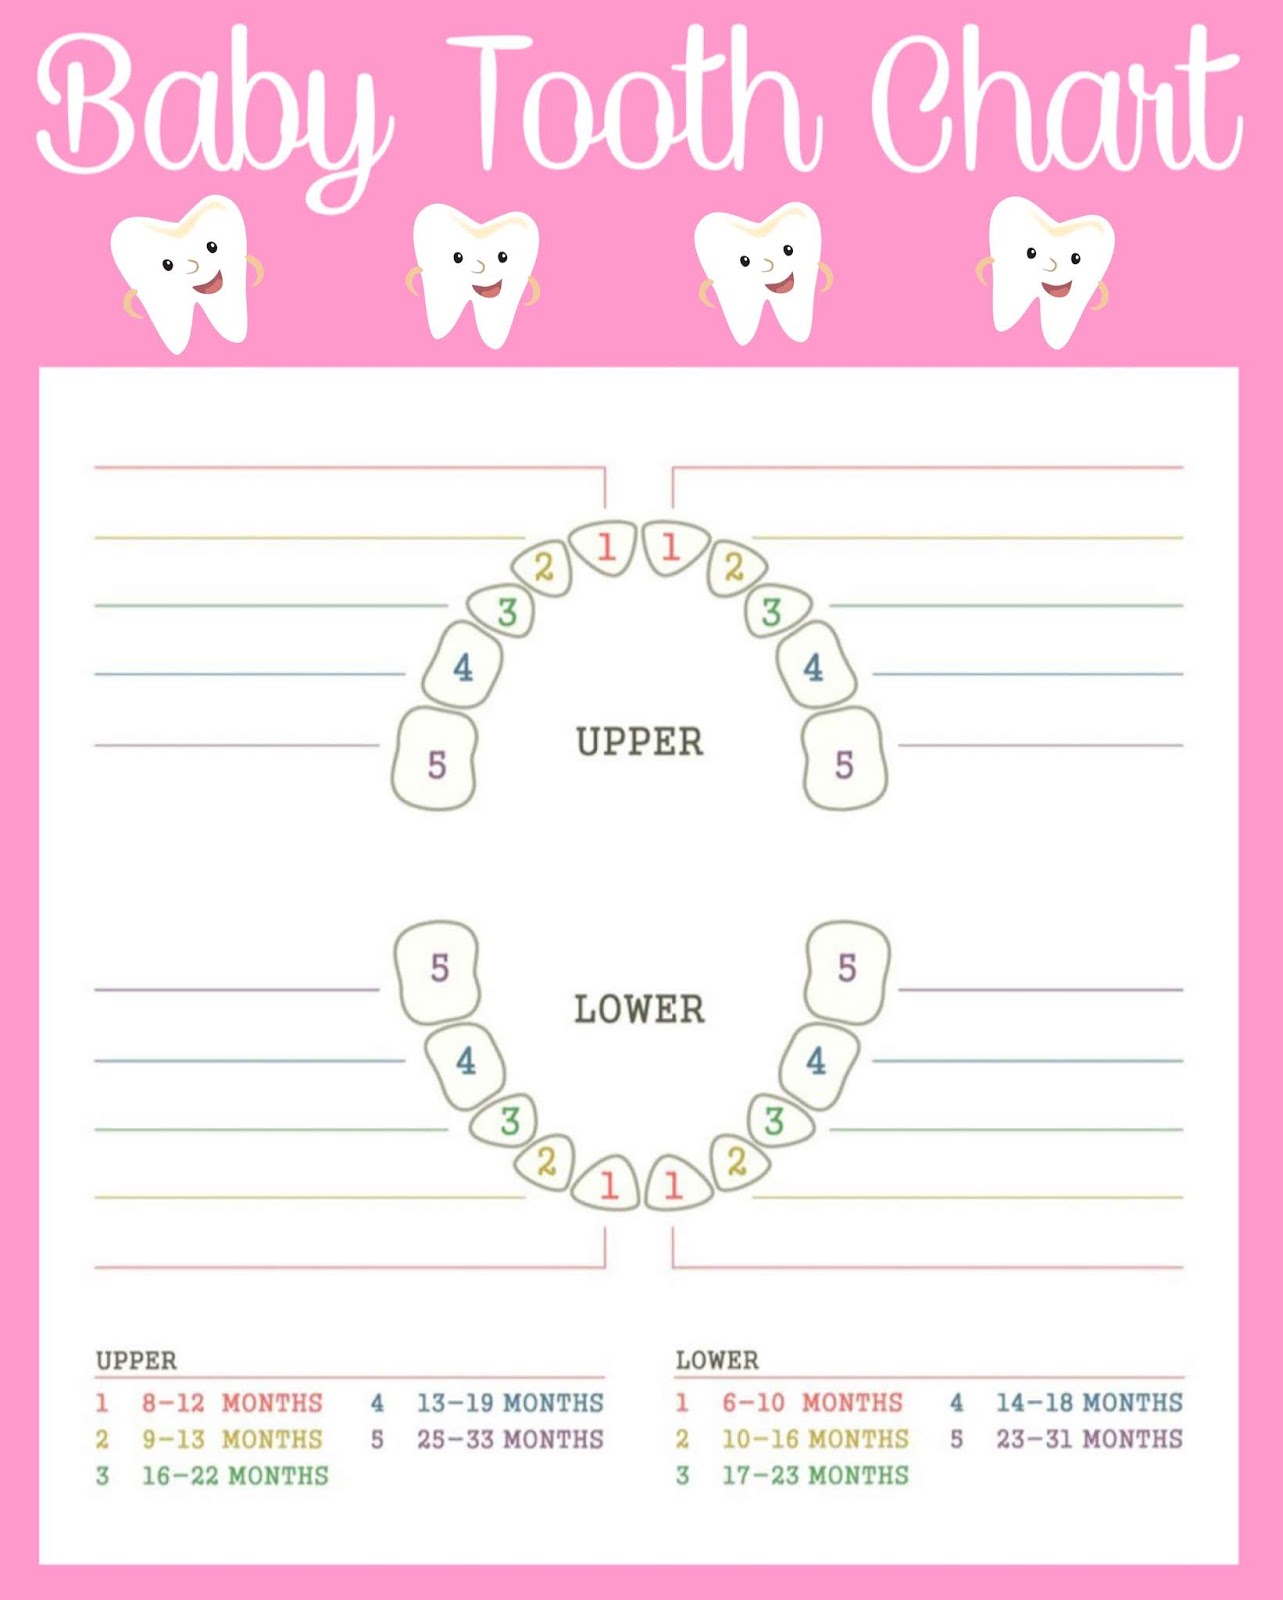 Free Printable Baby Tooth Chart